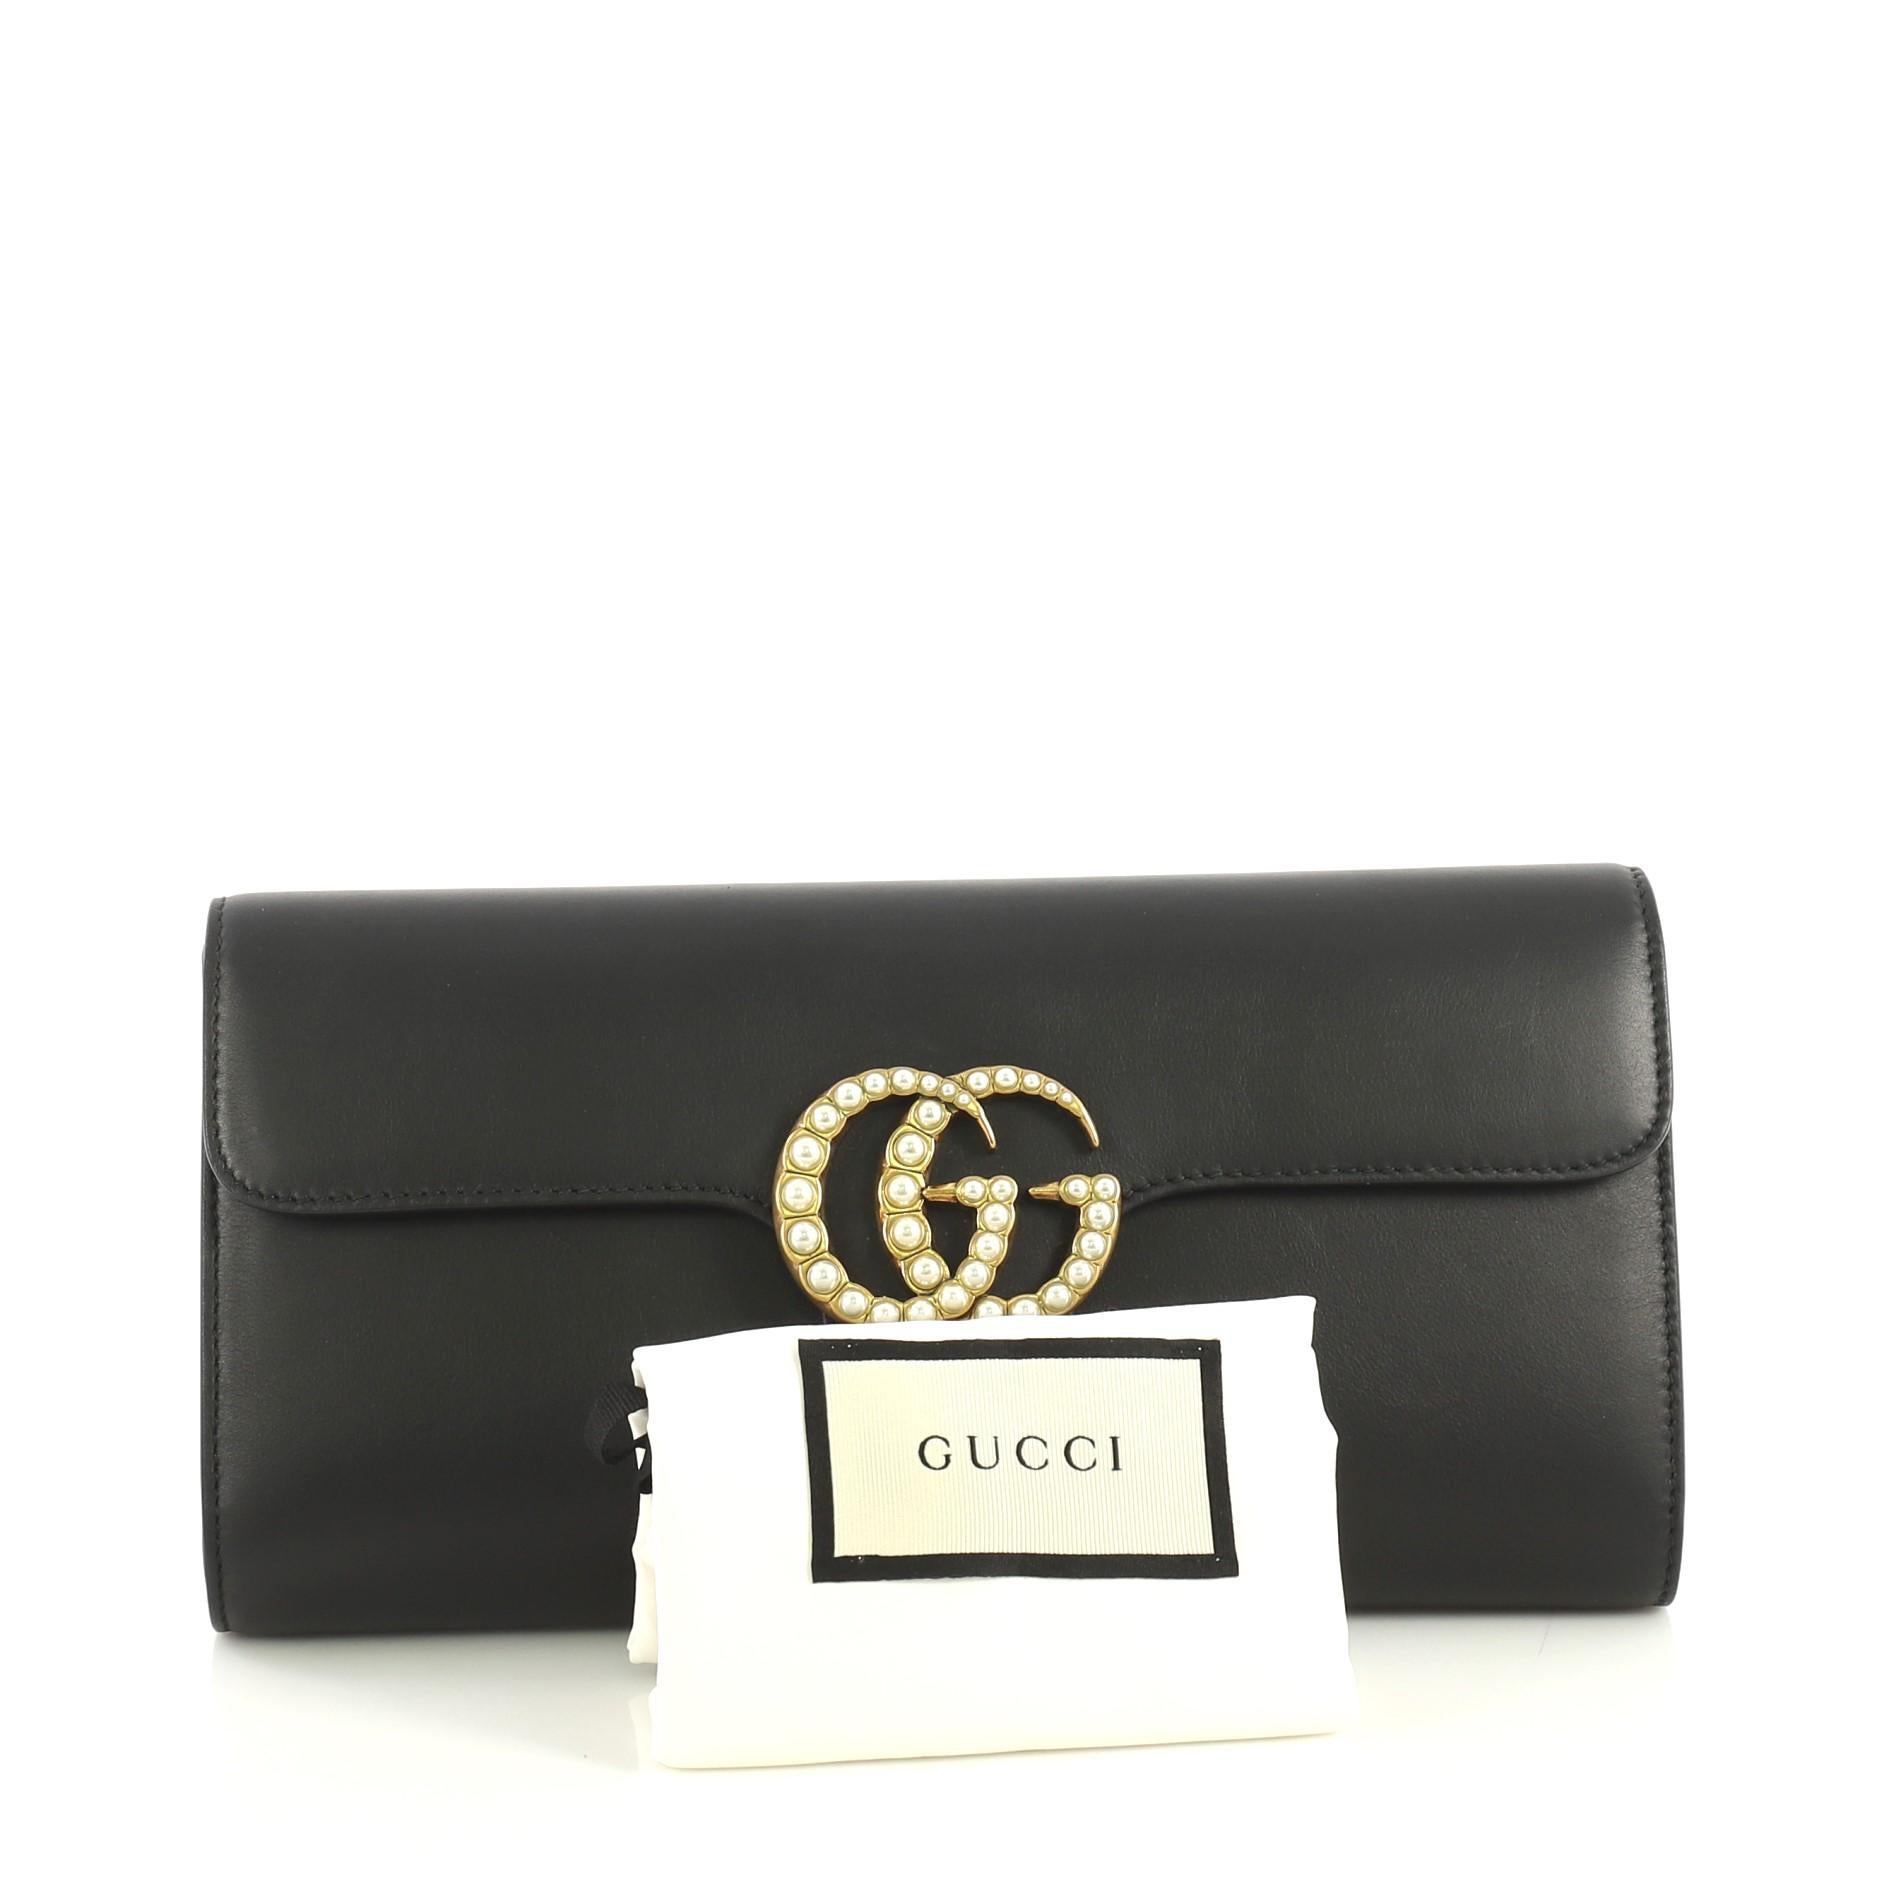 This Gucci Pearly GG Marmont Clutch Leather, crafted from black leather, features pearl studded GG logo and aged gold-tone hardware. Its magnetic closure opens to a brown leather interior with slip pocket. 

Estimated Retail Price: $1,100
Condition: